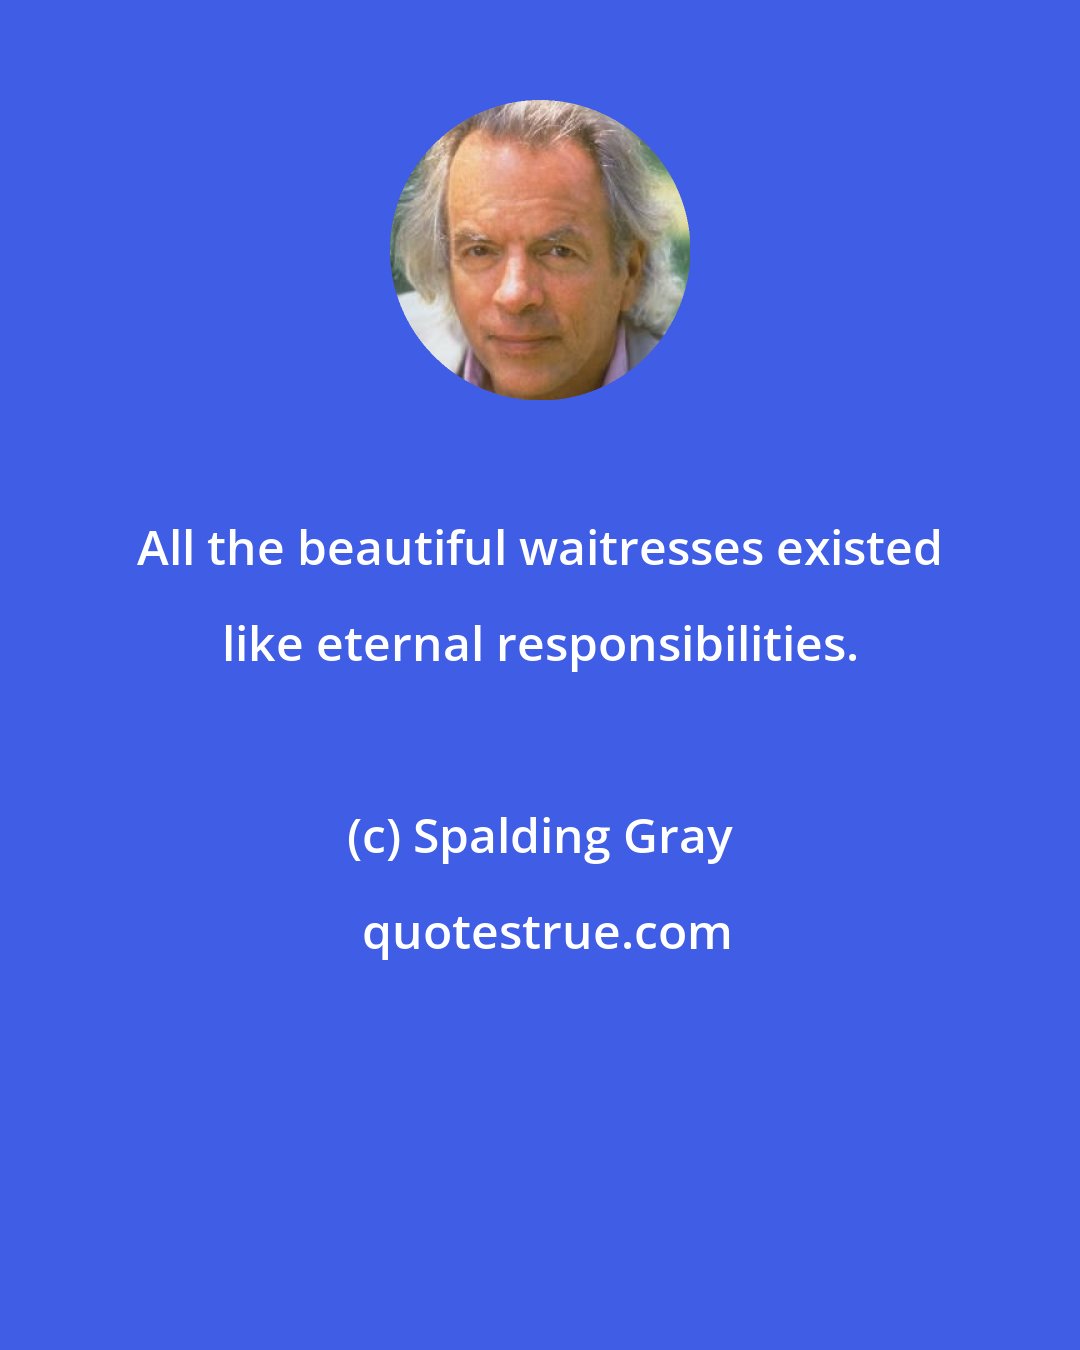 Spalding Gray: All the beautiful waitresses existed like eternal responsibilities.